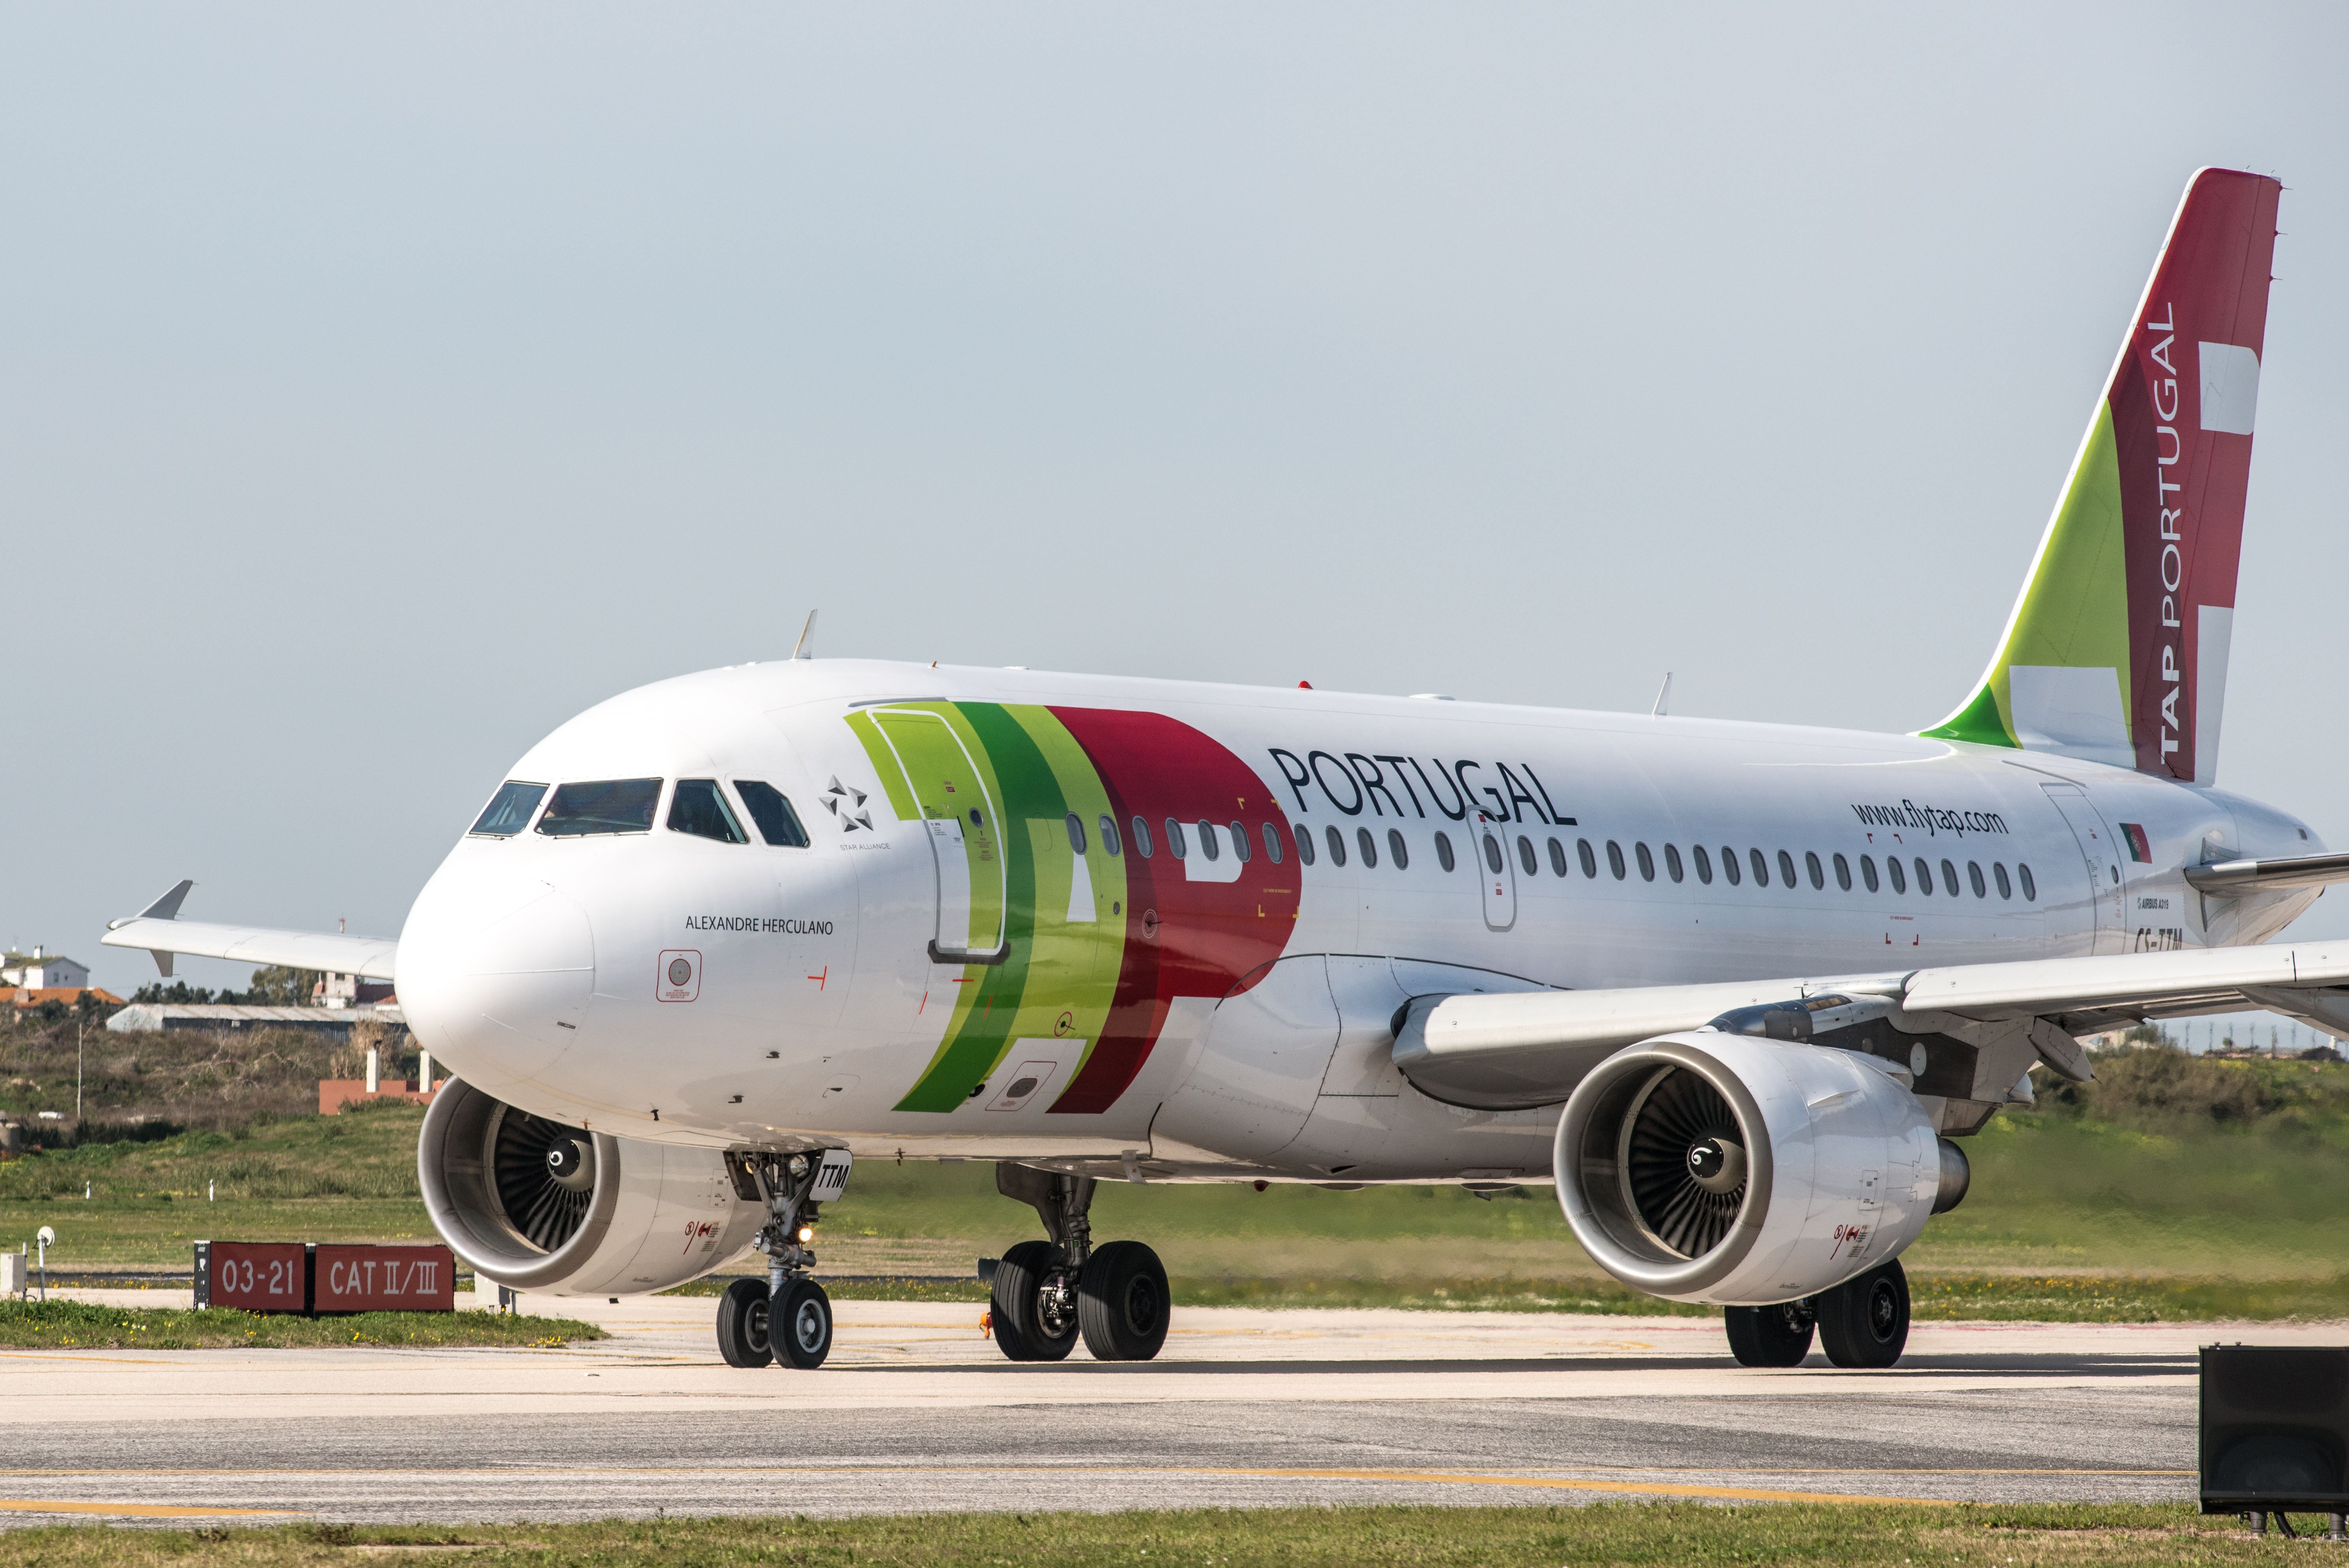 Tap Air Portugal Airbus A319 on taxiway